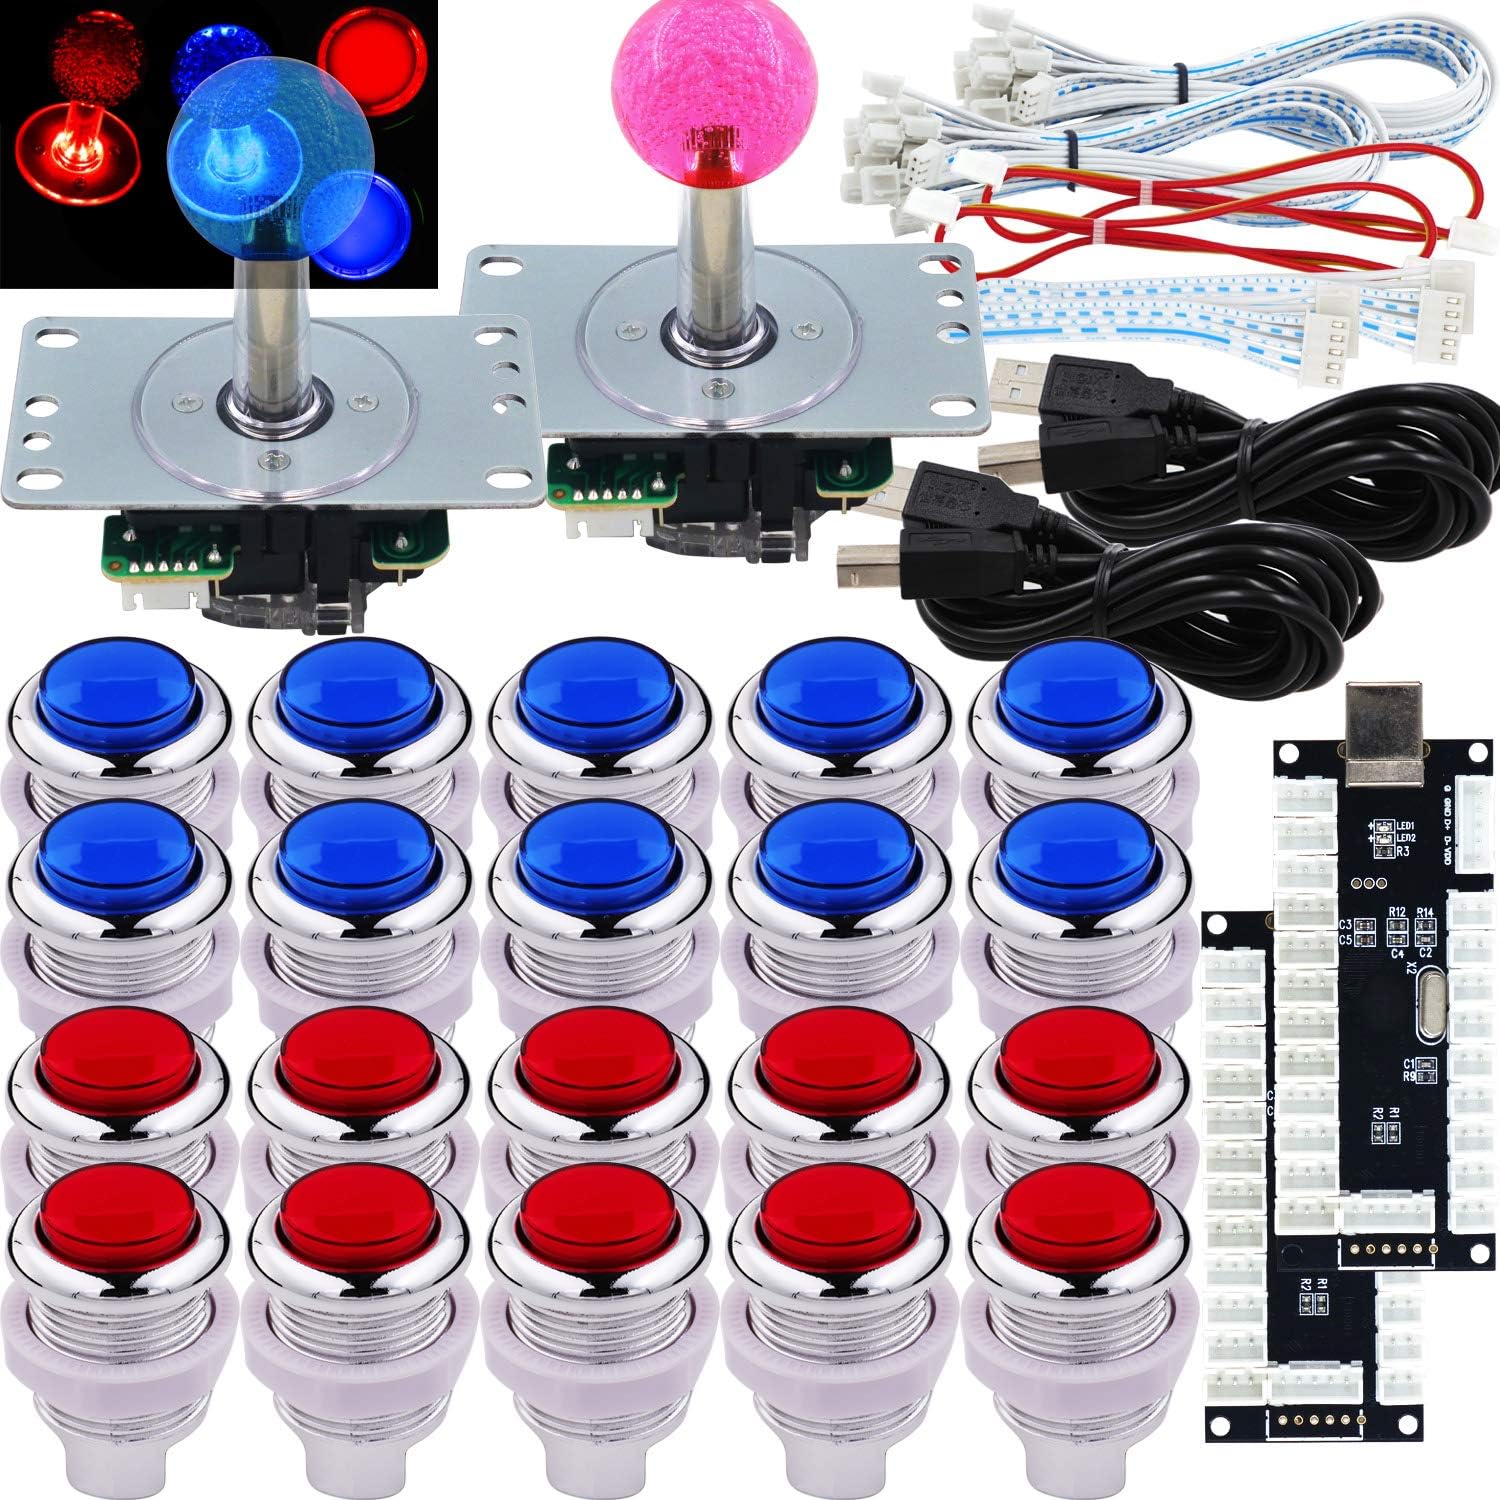 SJ@JX Arcade 2 Player Game Controller LED Buttons [...]